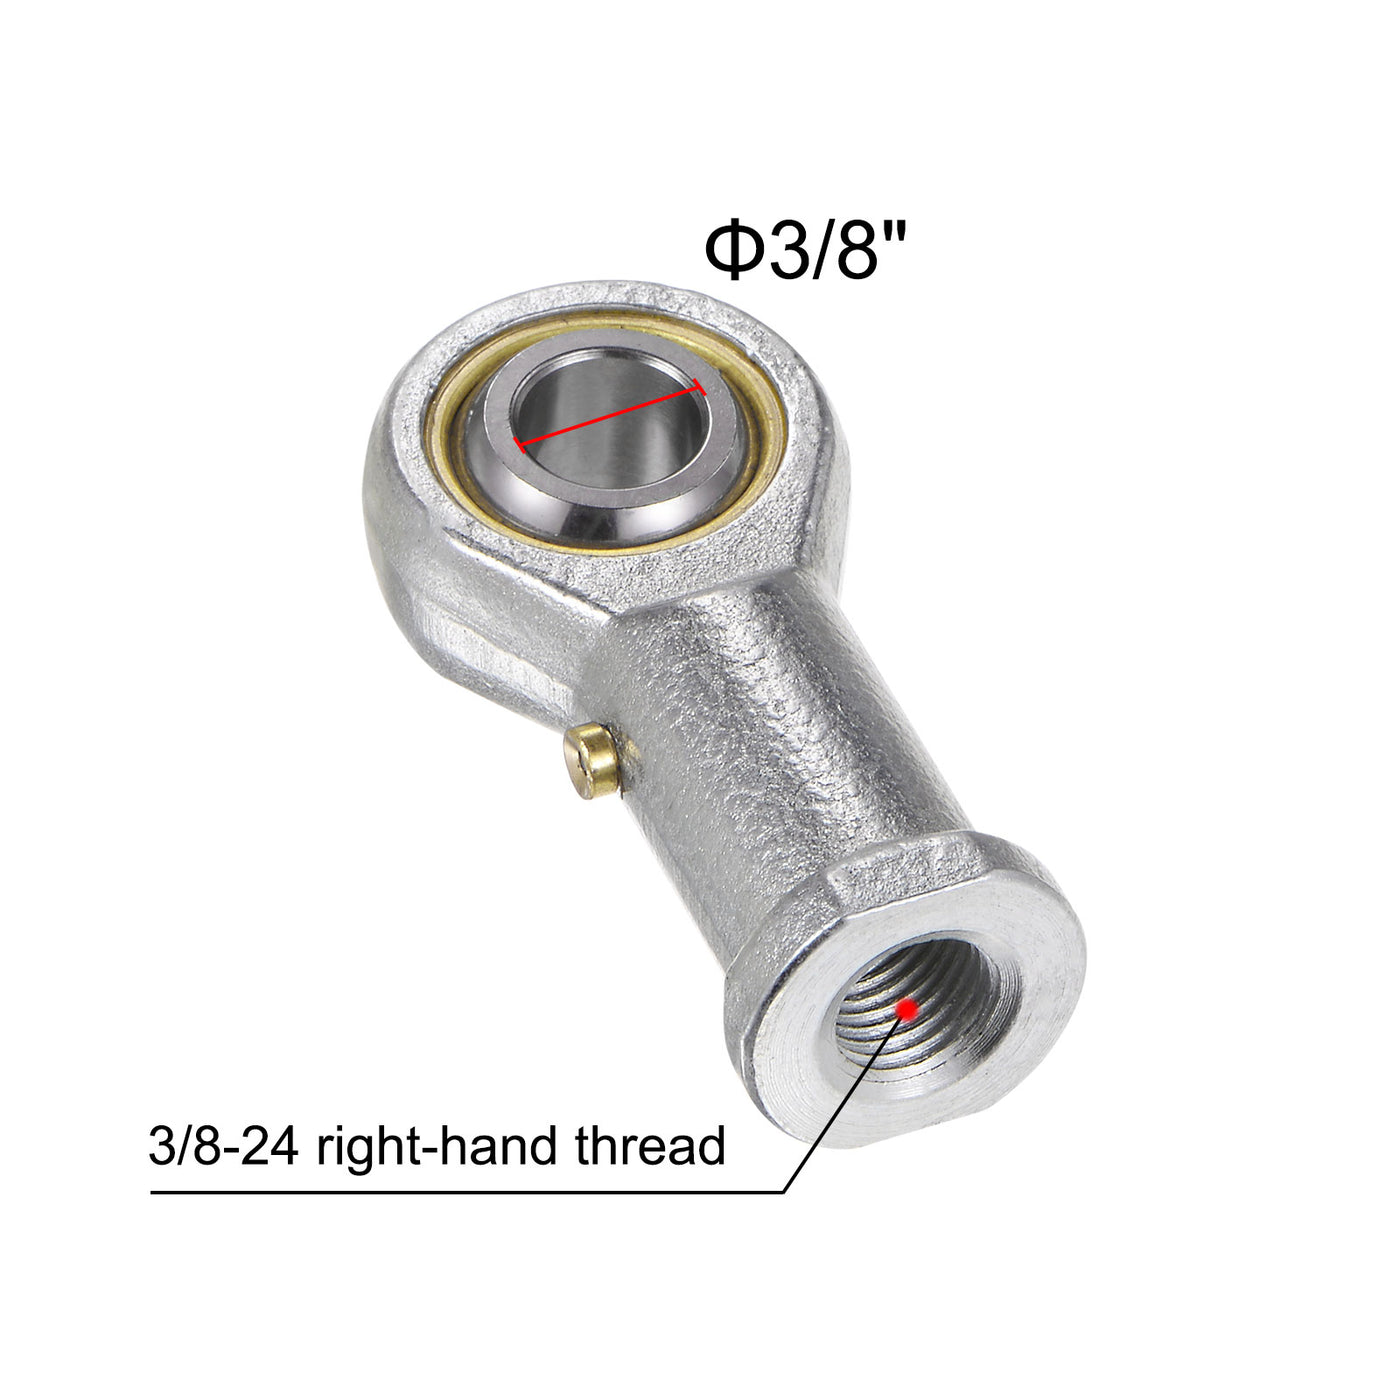 uxcell Uxcell 2pcs PHSB6 Female Rod End 3/8" Bore and 3/8-24 Right Hand Thread with Jam Nut